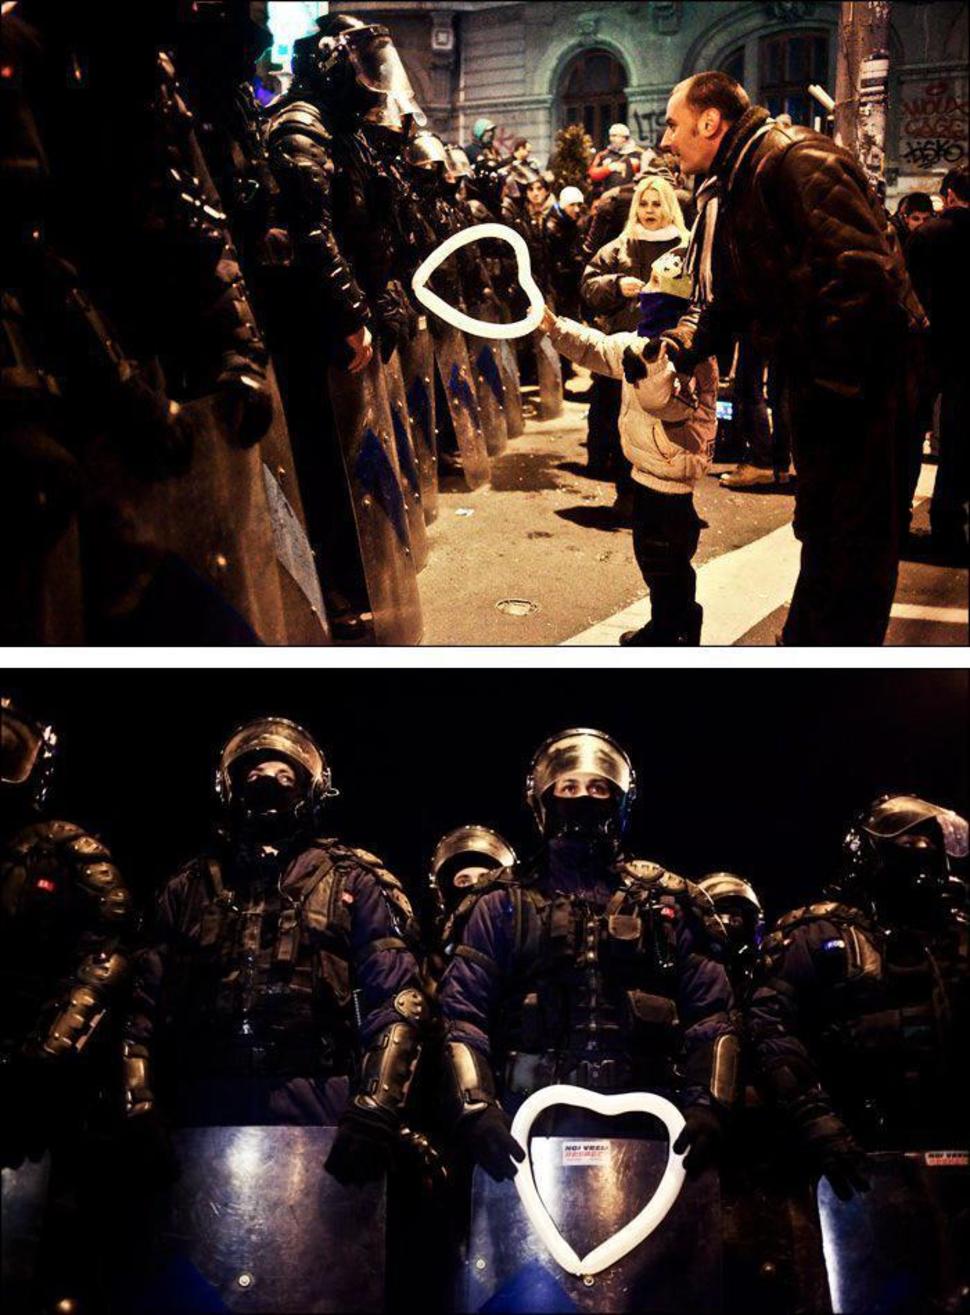 12. Touching moment from the riot in Bucharest, Romania